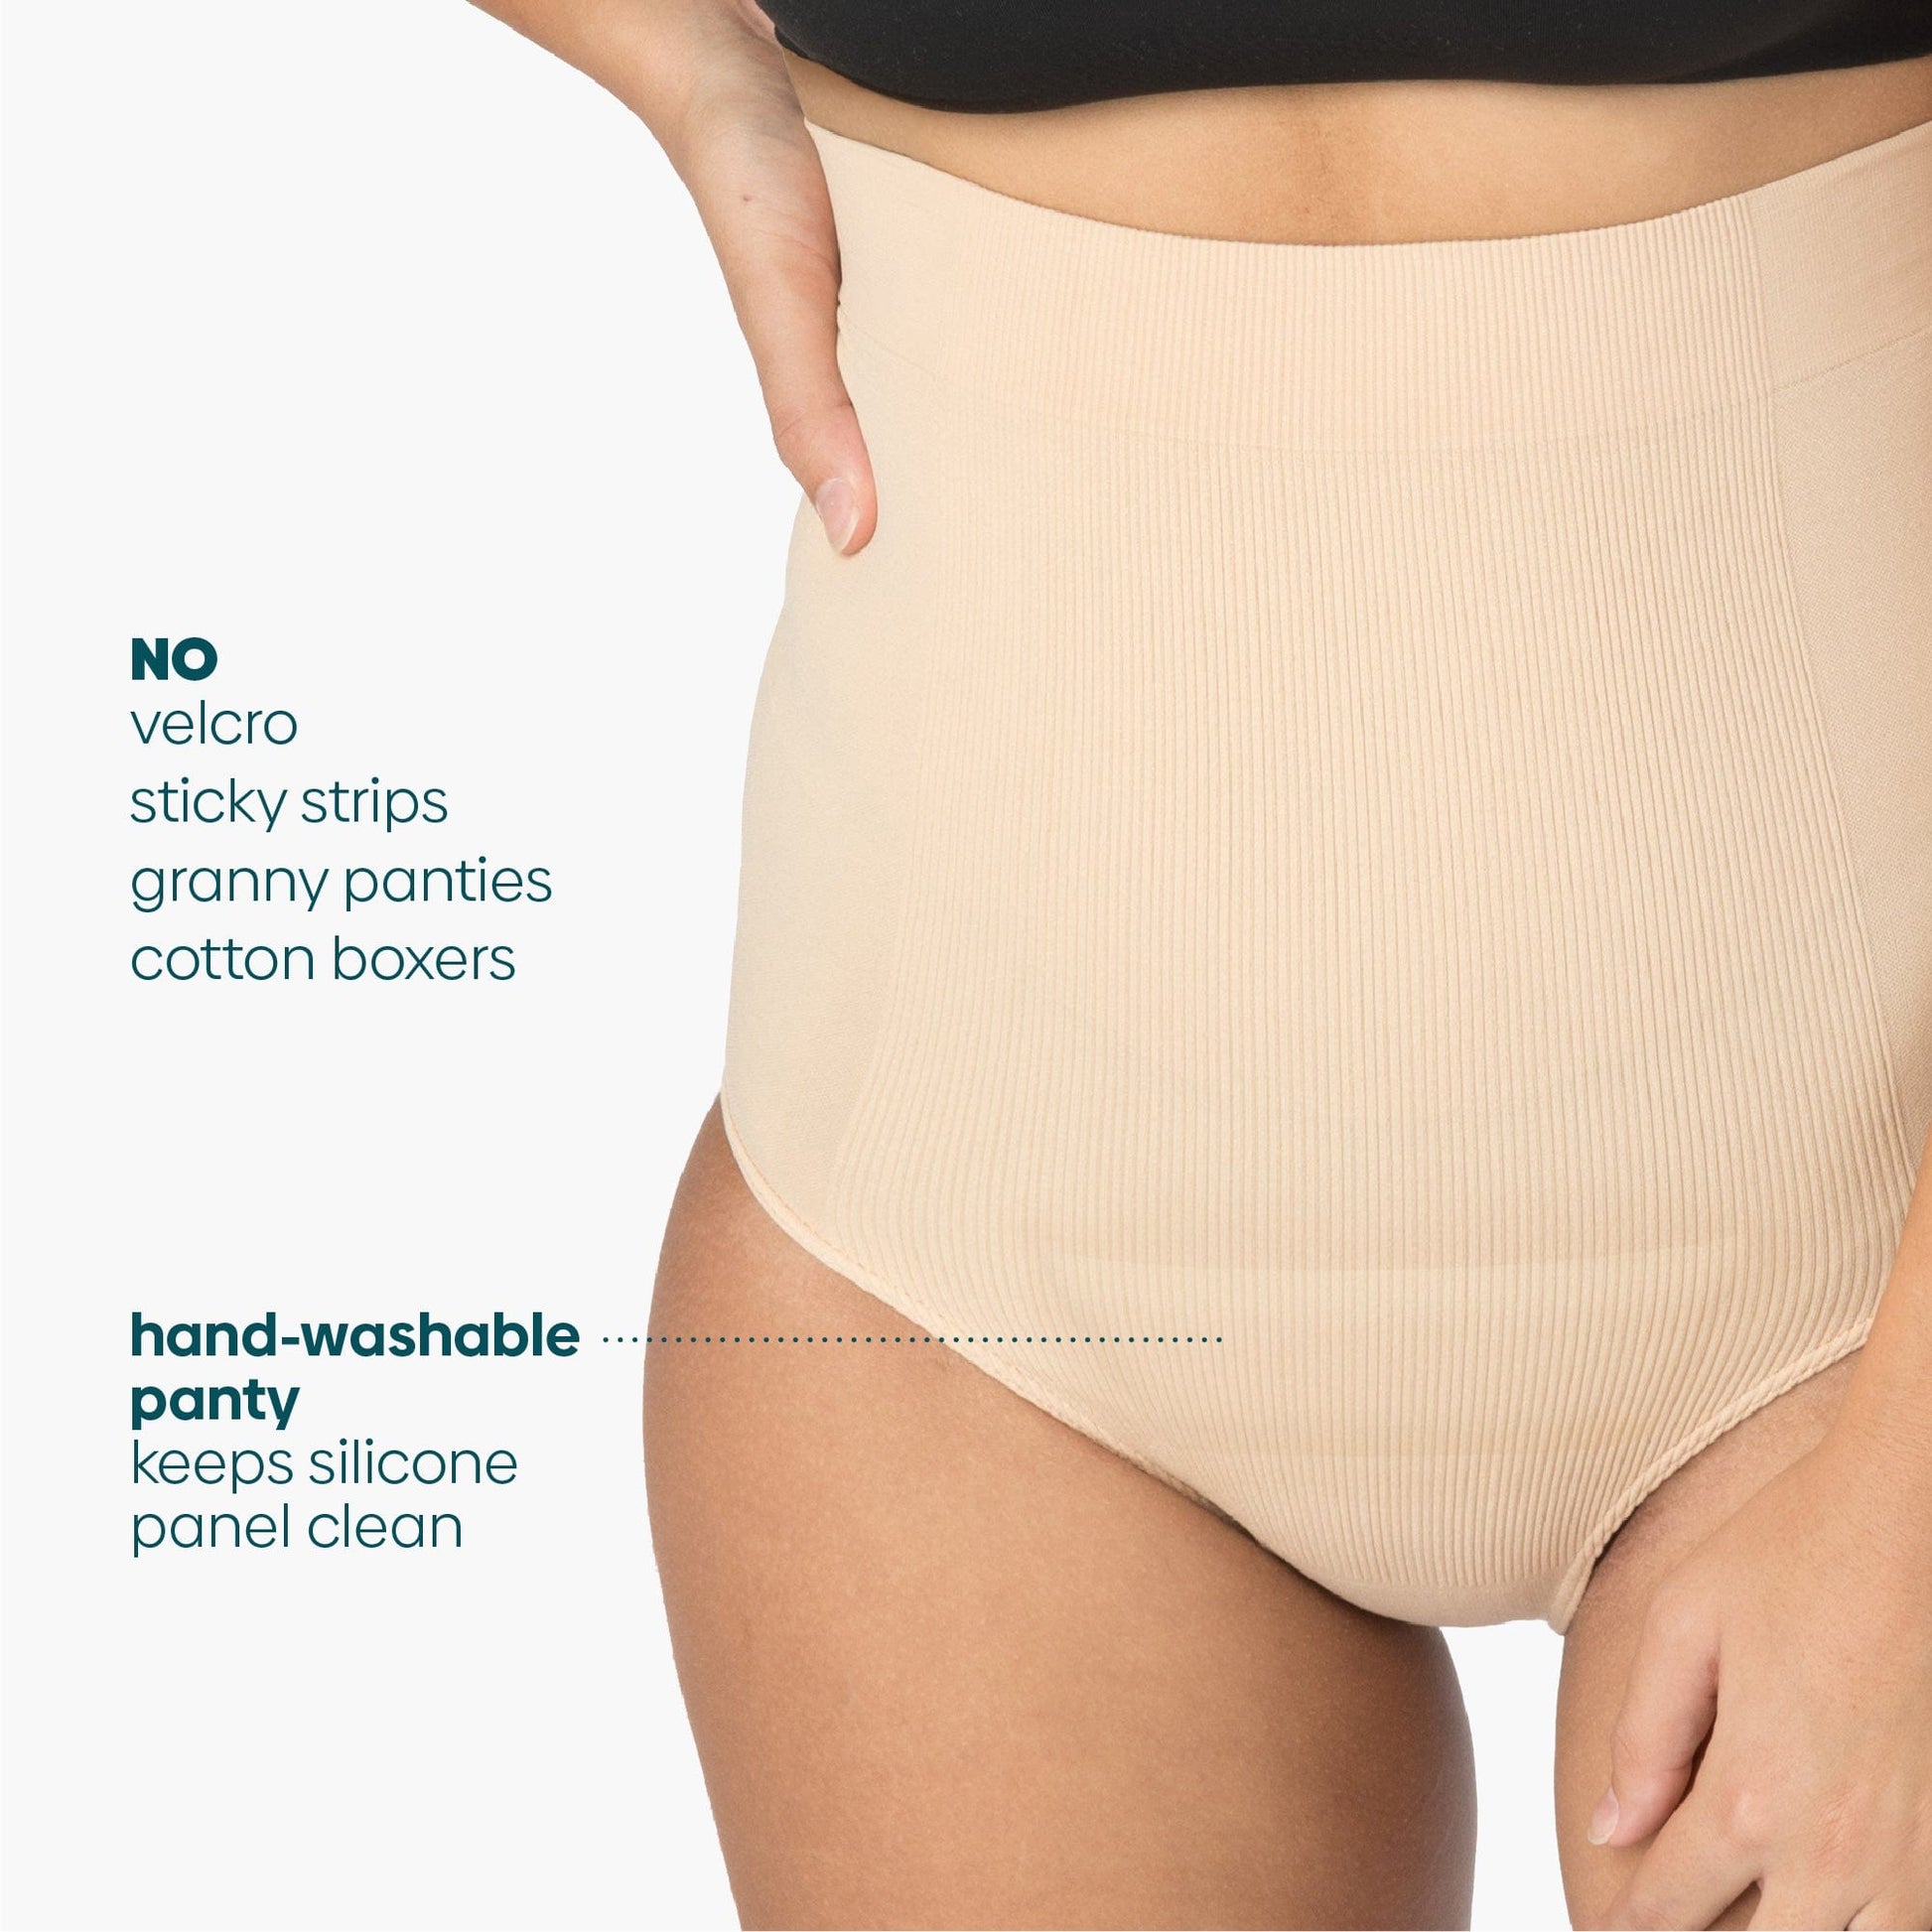 C Panty does not contain velcro, sticky strips, and are hand washable